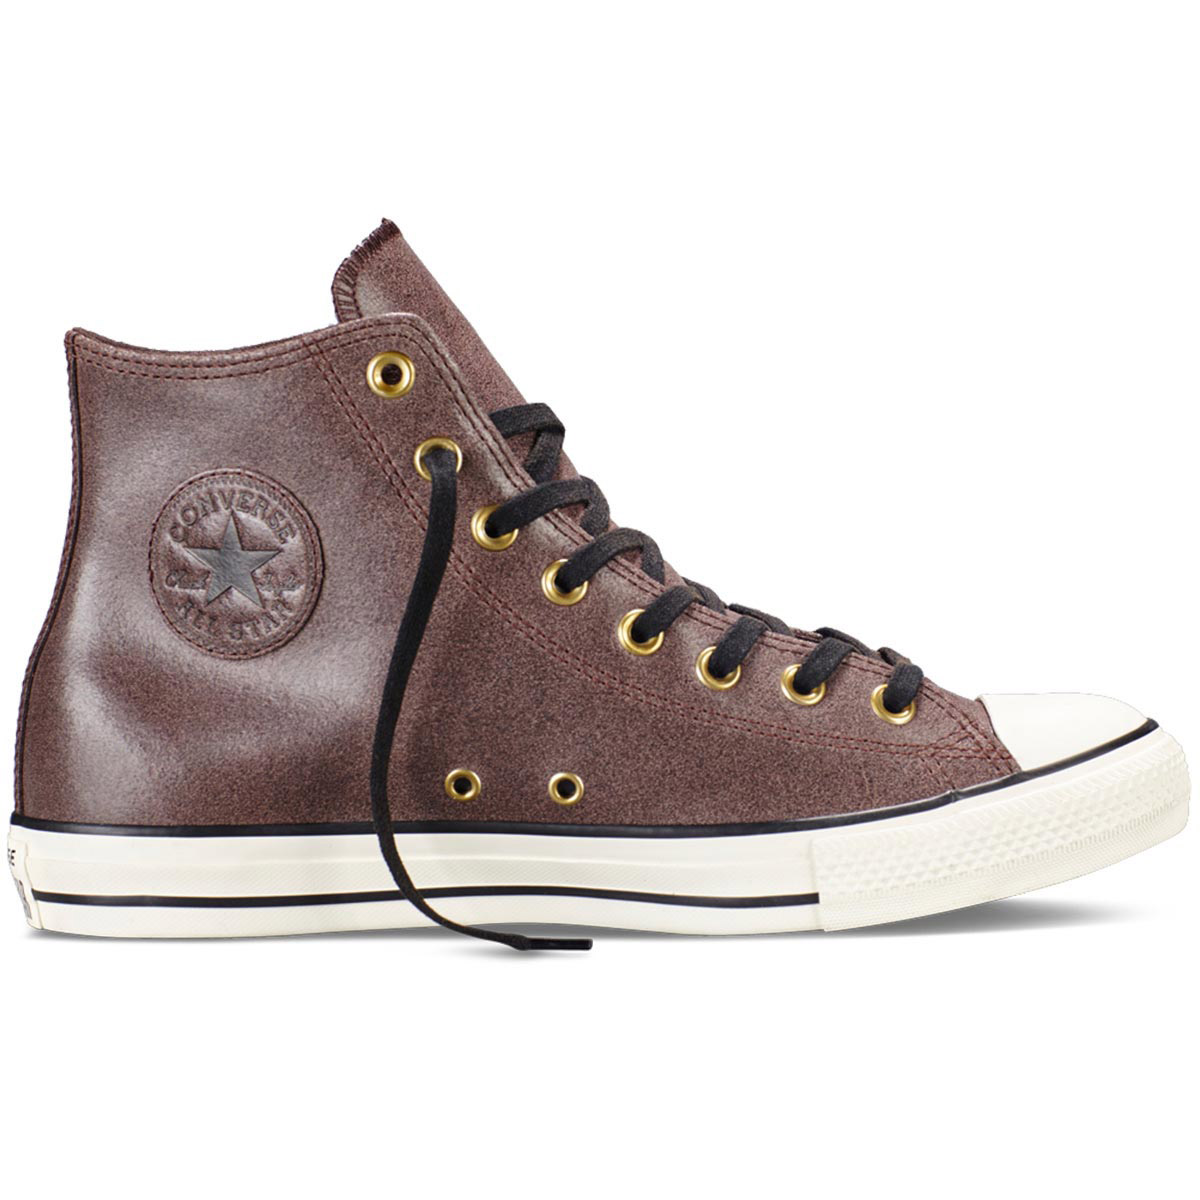 mens brown leather converse high tops